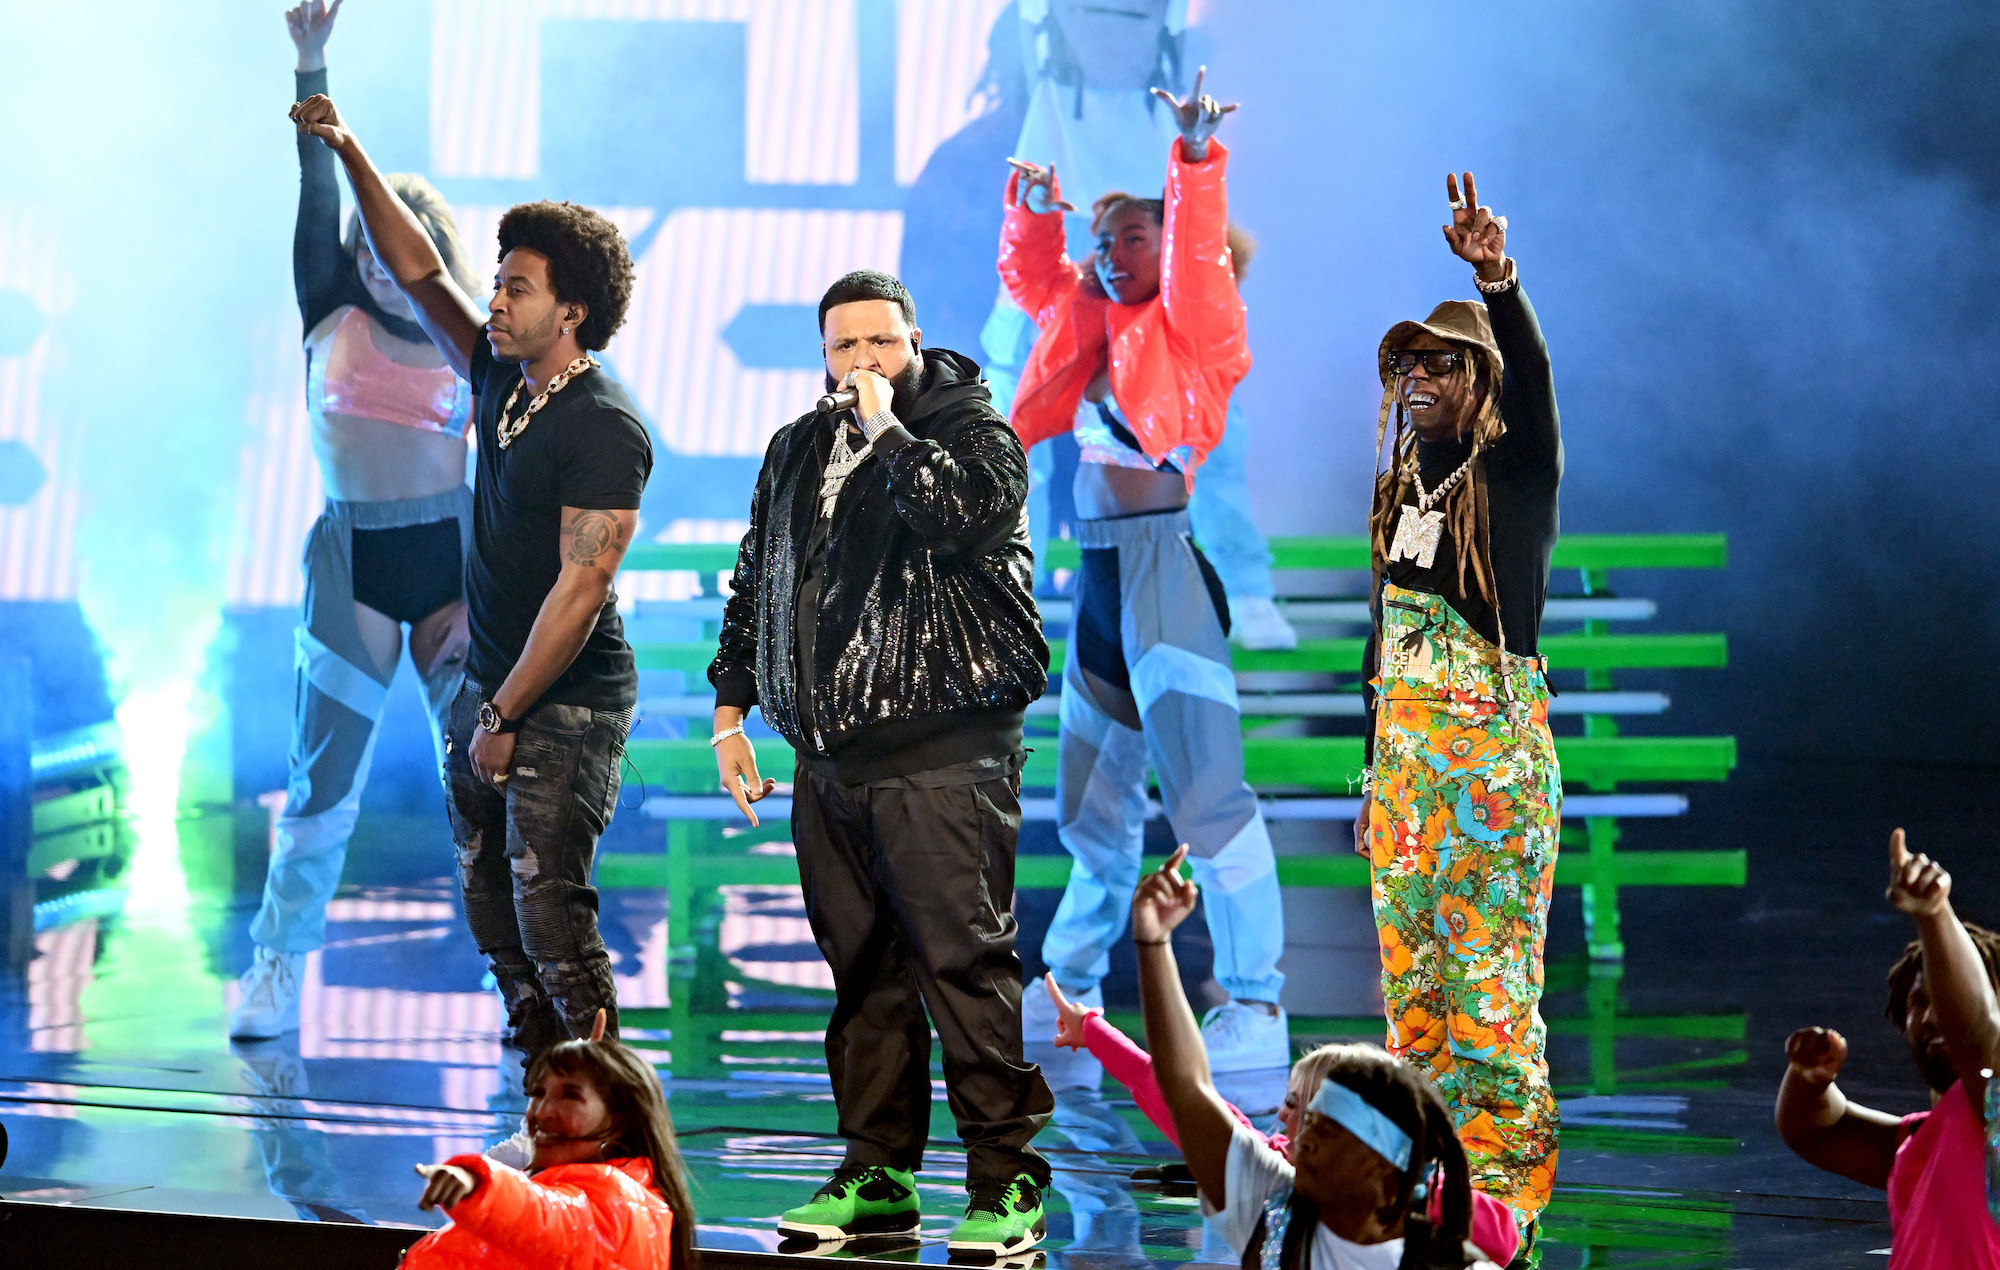 Watch DJ Khaled bring out Lil Wayne, Lil Baby, Migos and more for NBA  All-Star performance